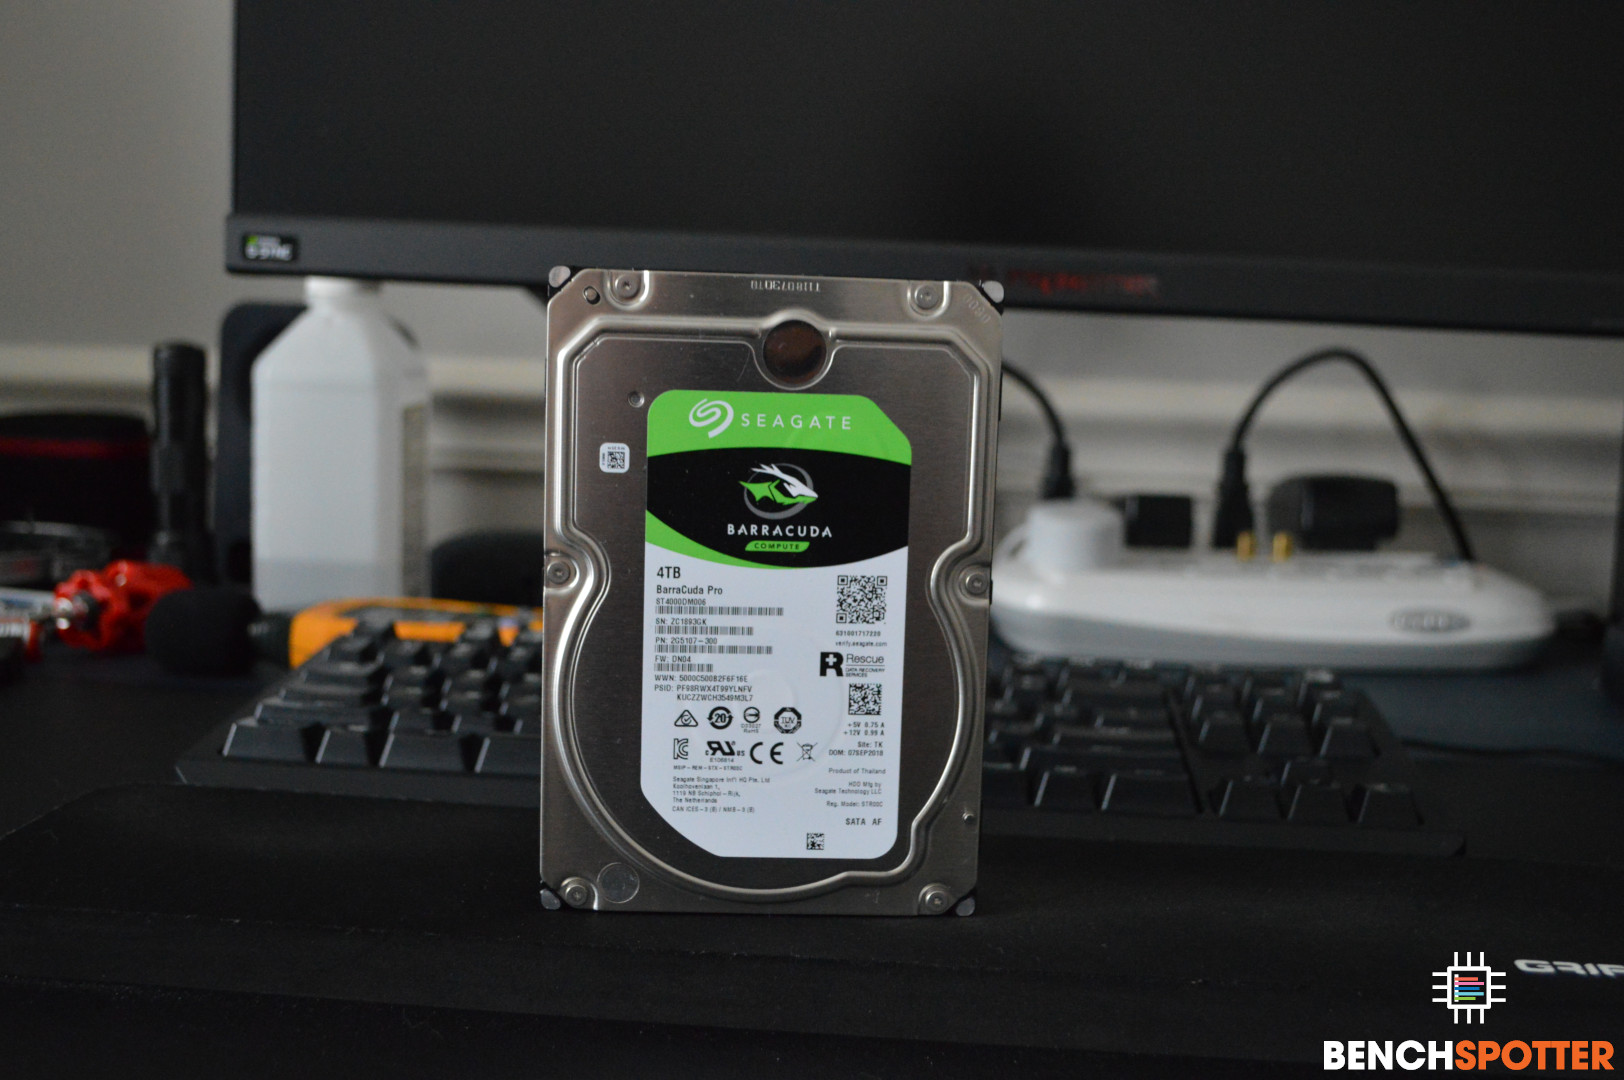 Seagate BarraCuda Pro 10TB HDD Review 